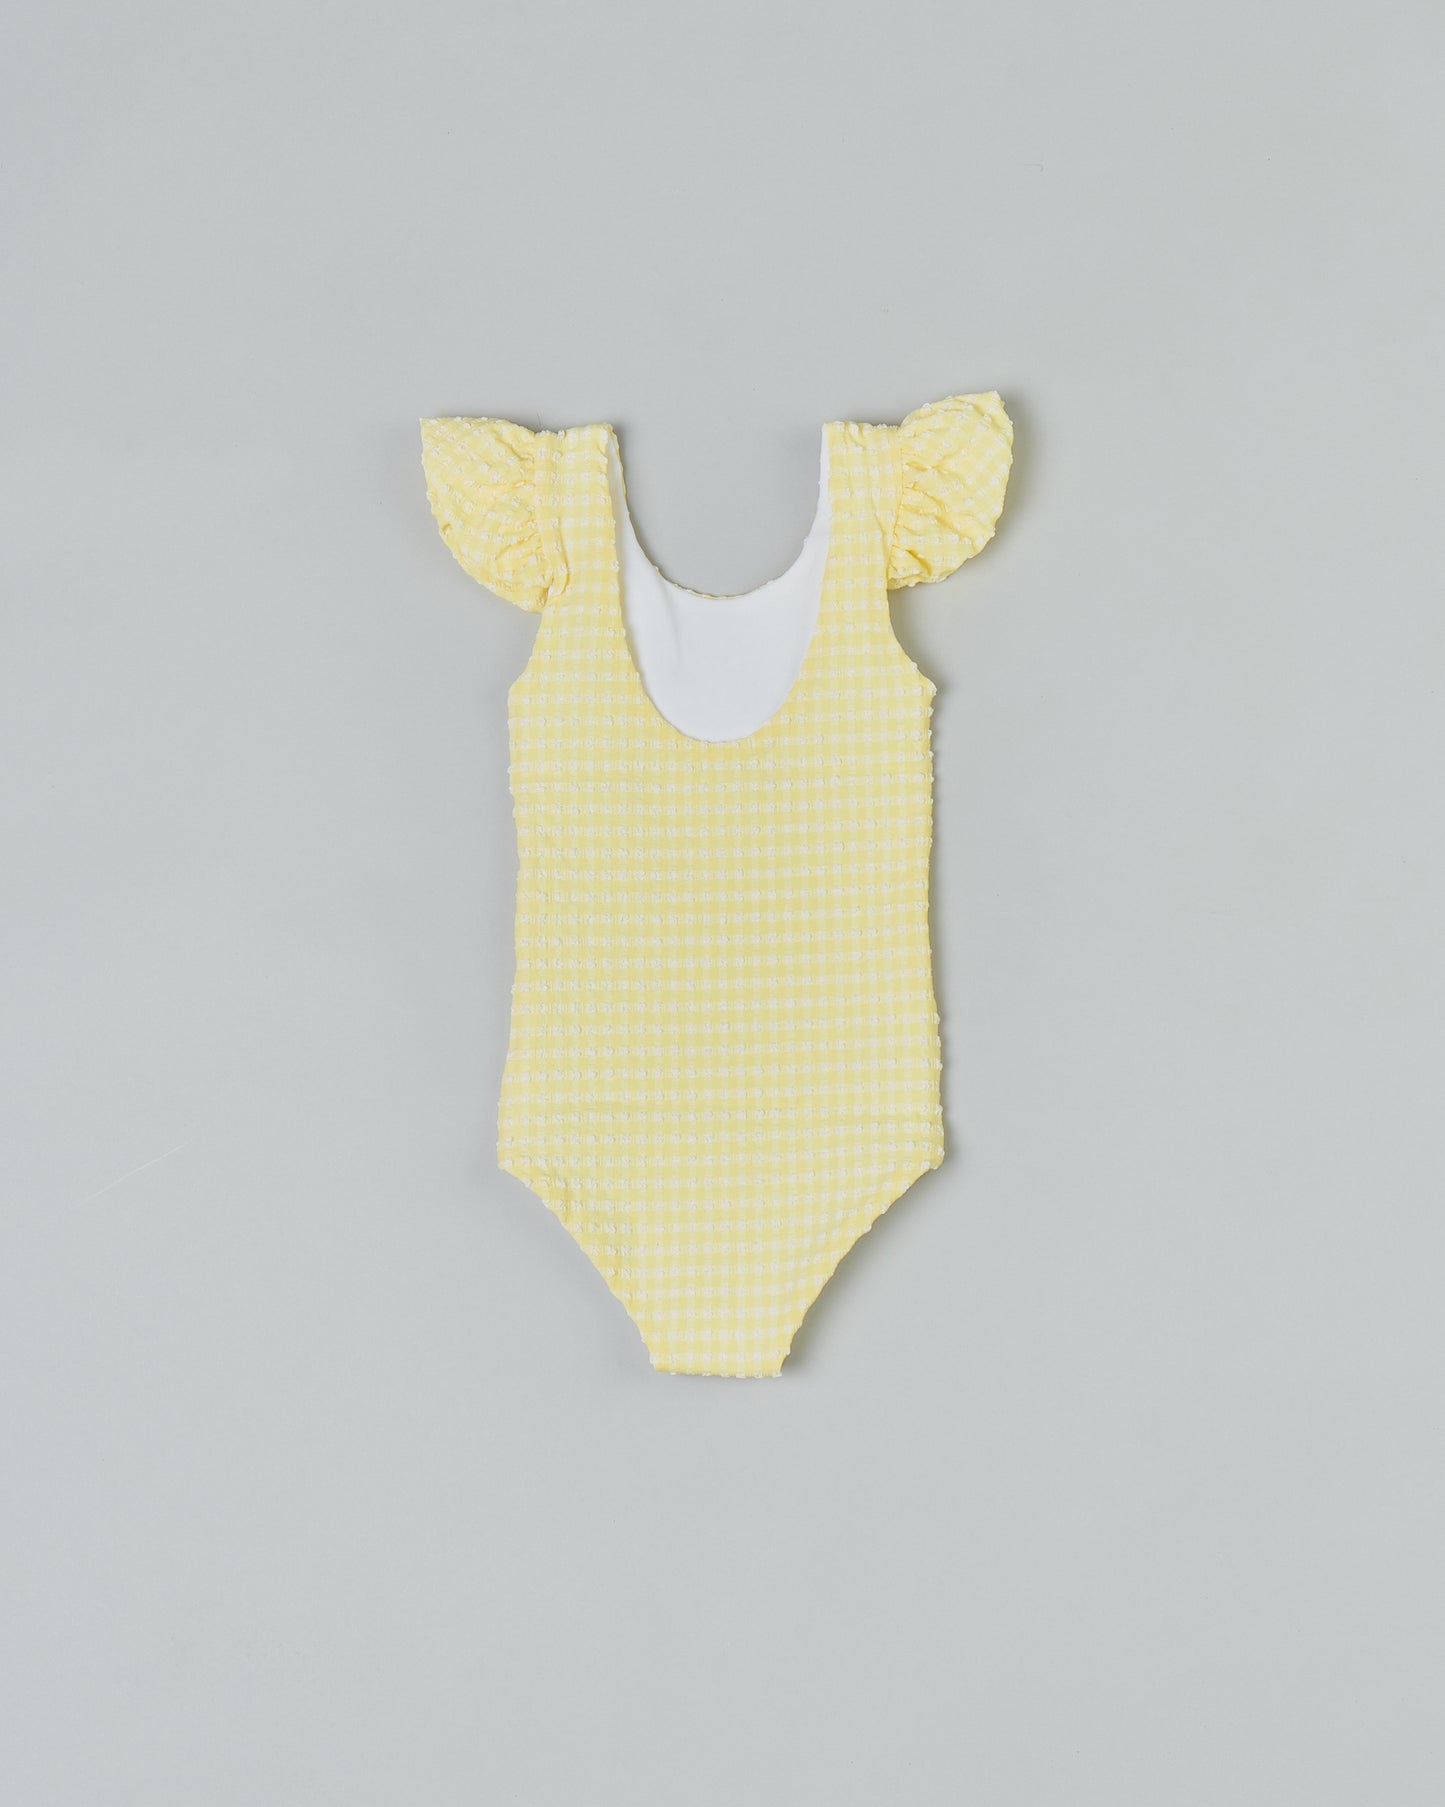 Leonor Girls One Piece in Citrine Gingham